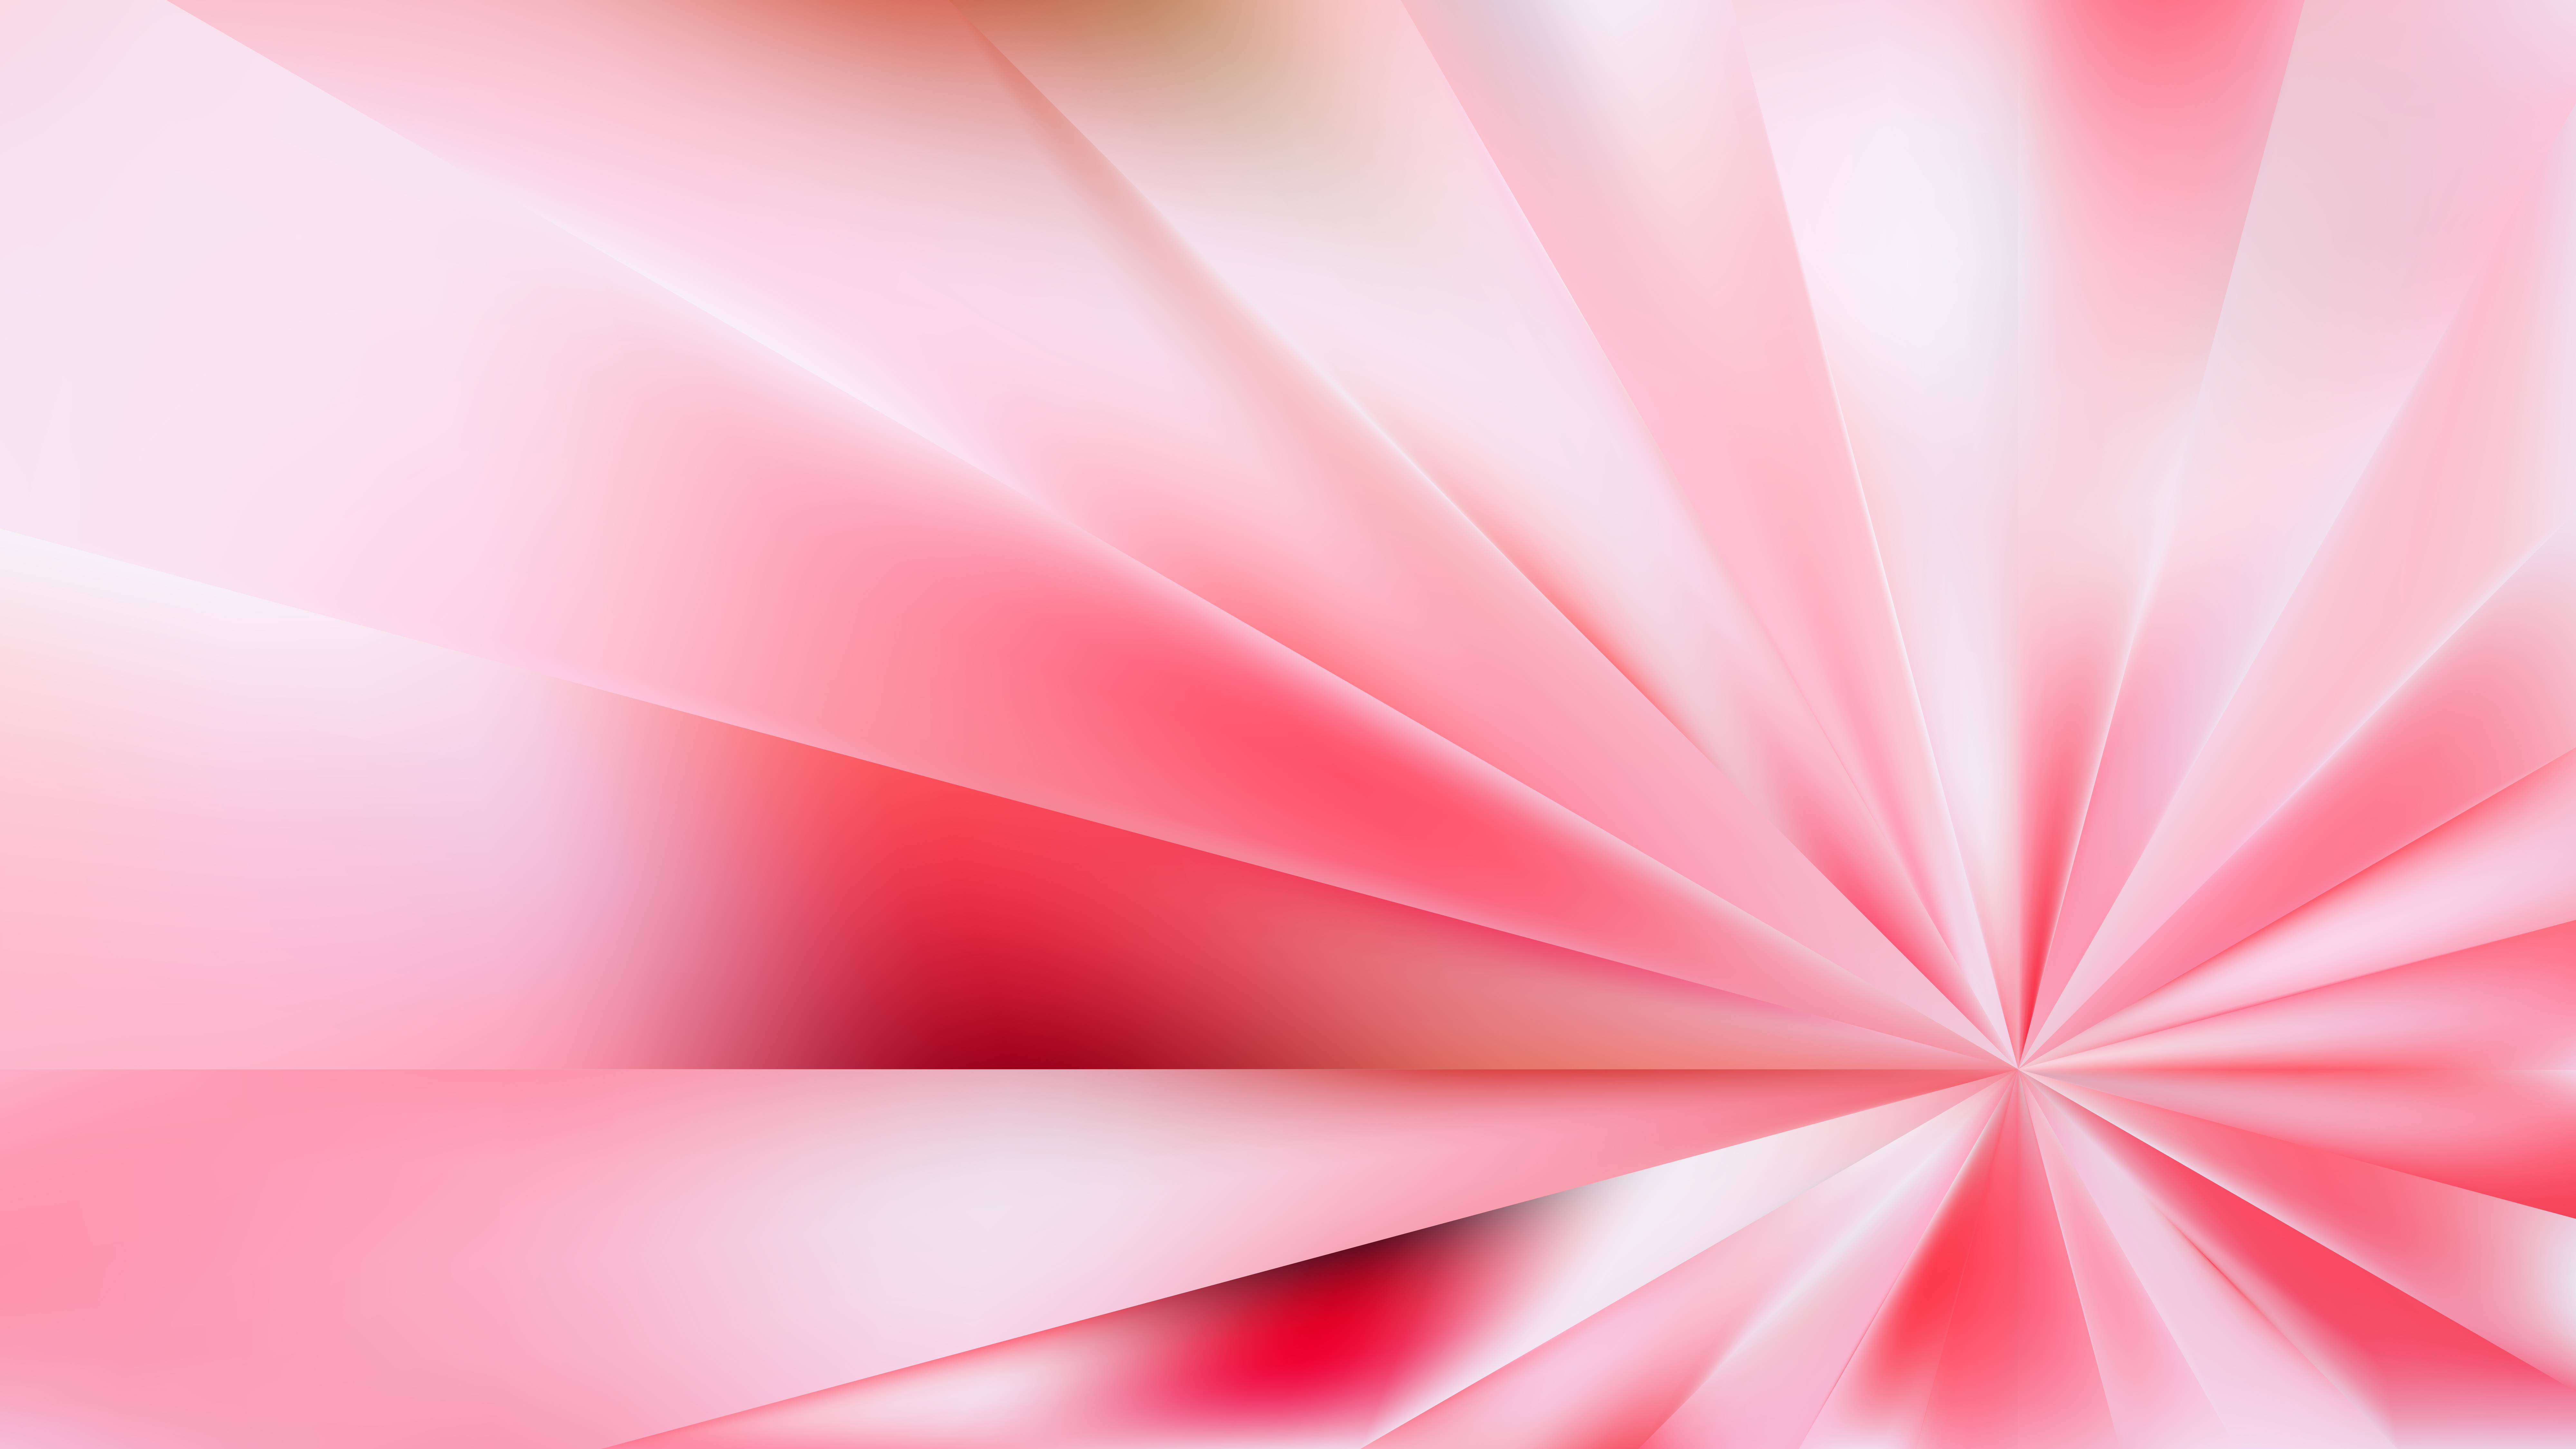 light pink abstract background